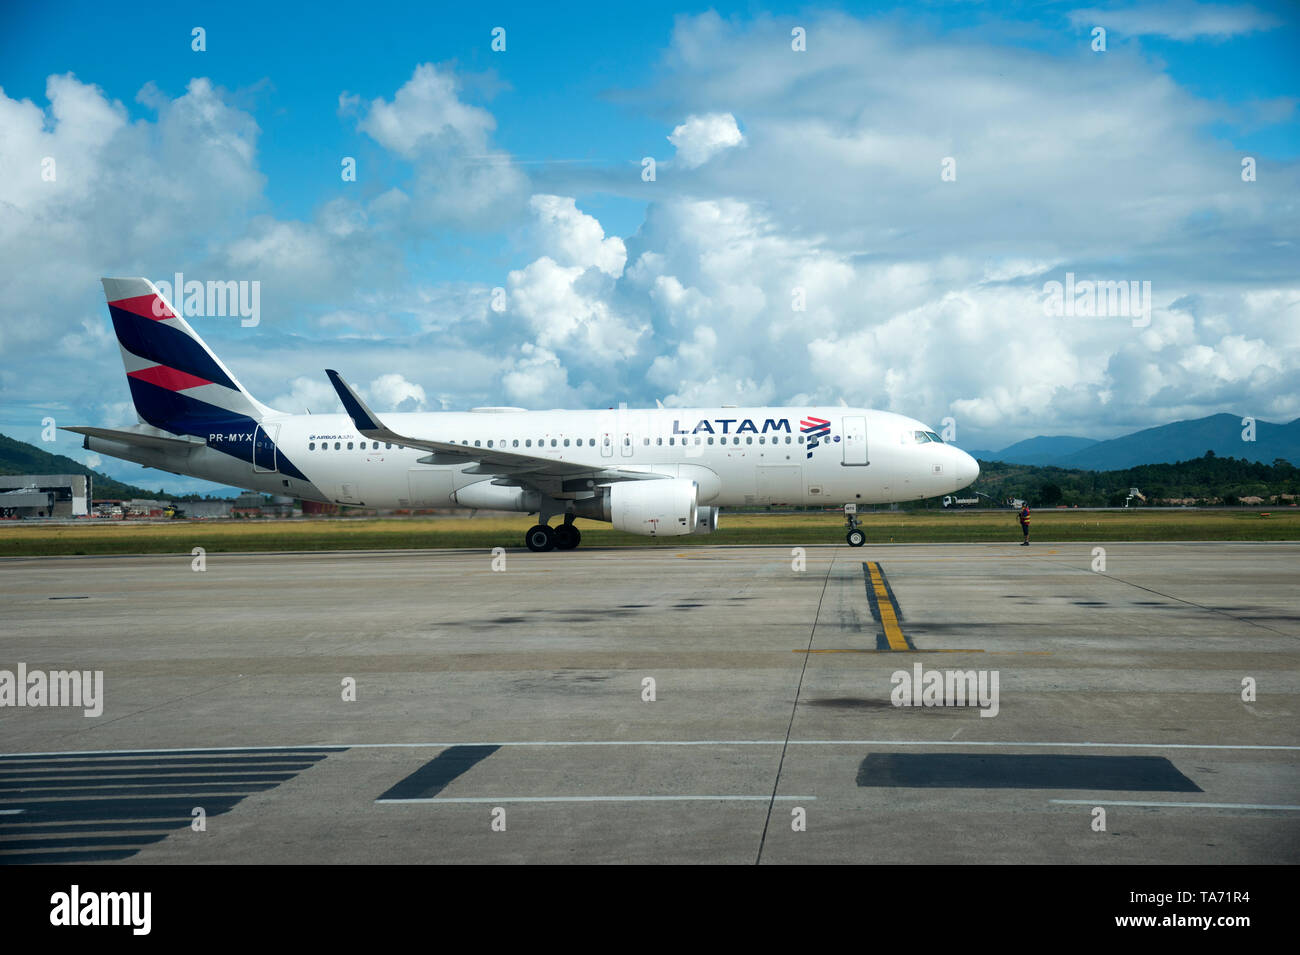 Chapeco - Brazil March 29, 2019 Airplane photo of airline Latam, at the airport in Brazil Stock Photo